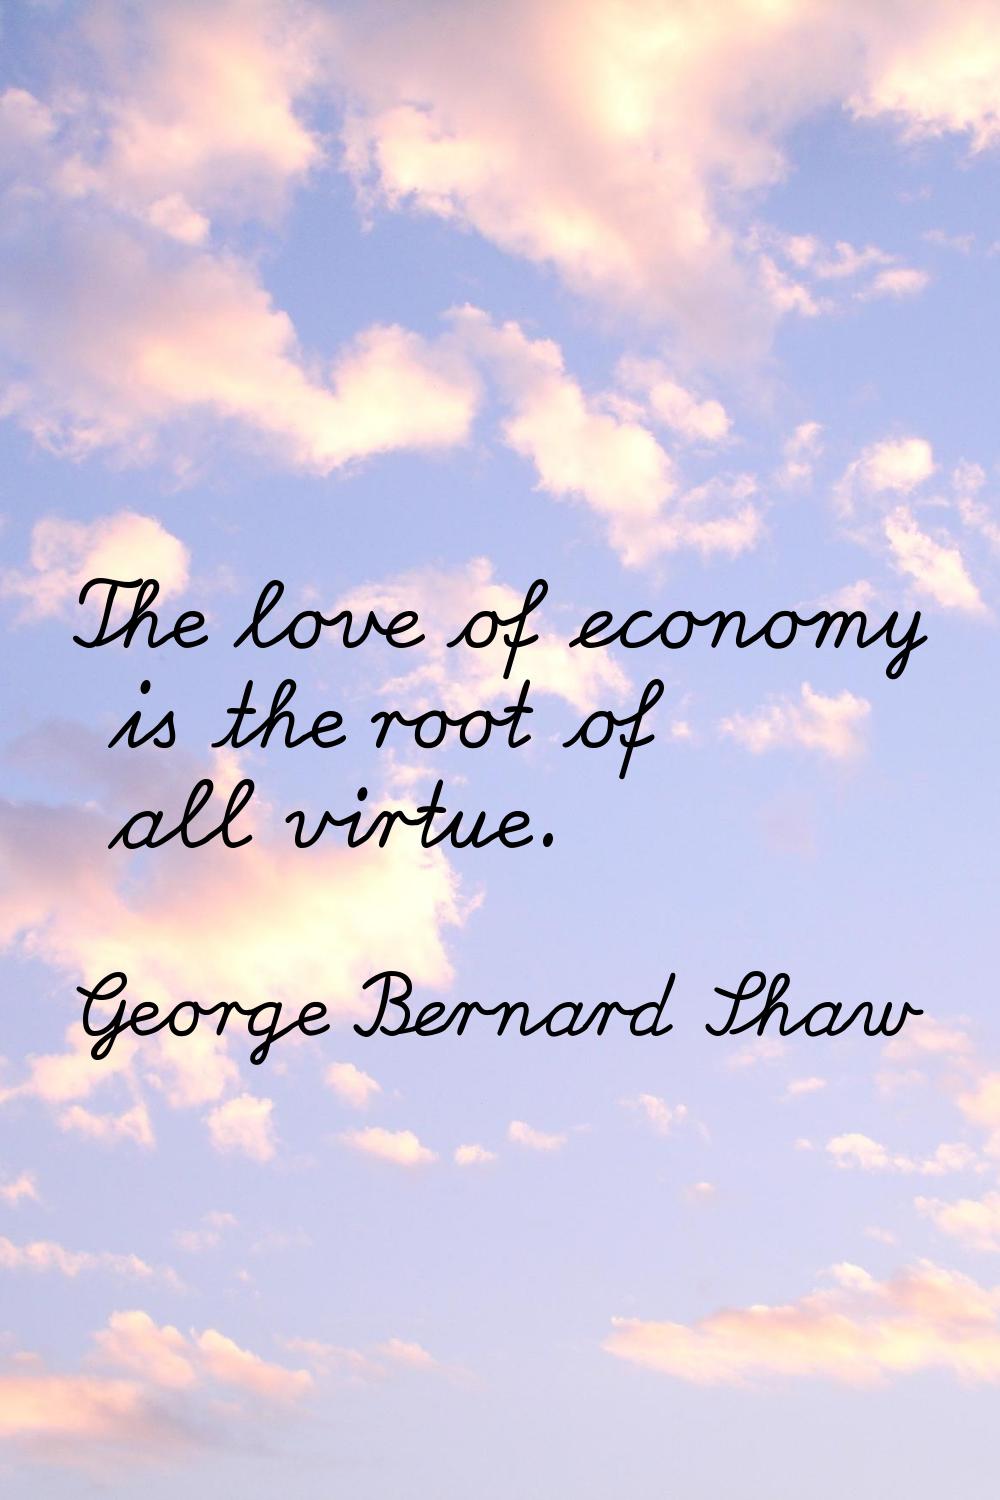 The love of economy is the root of all virtue.